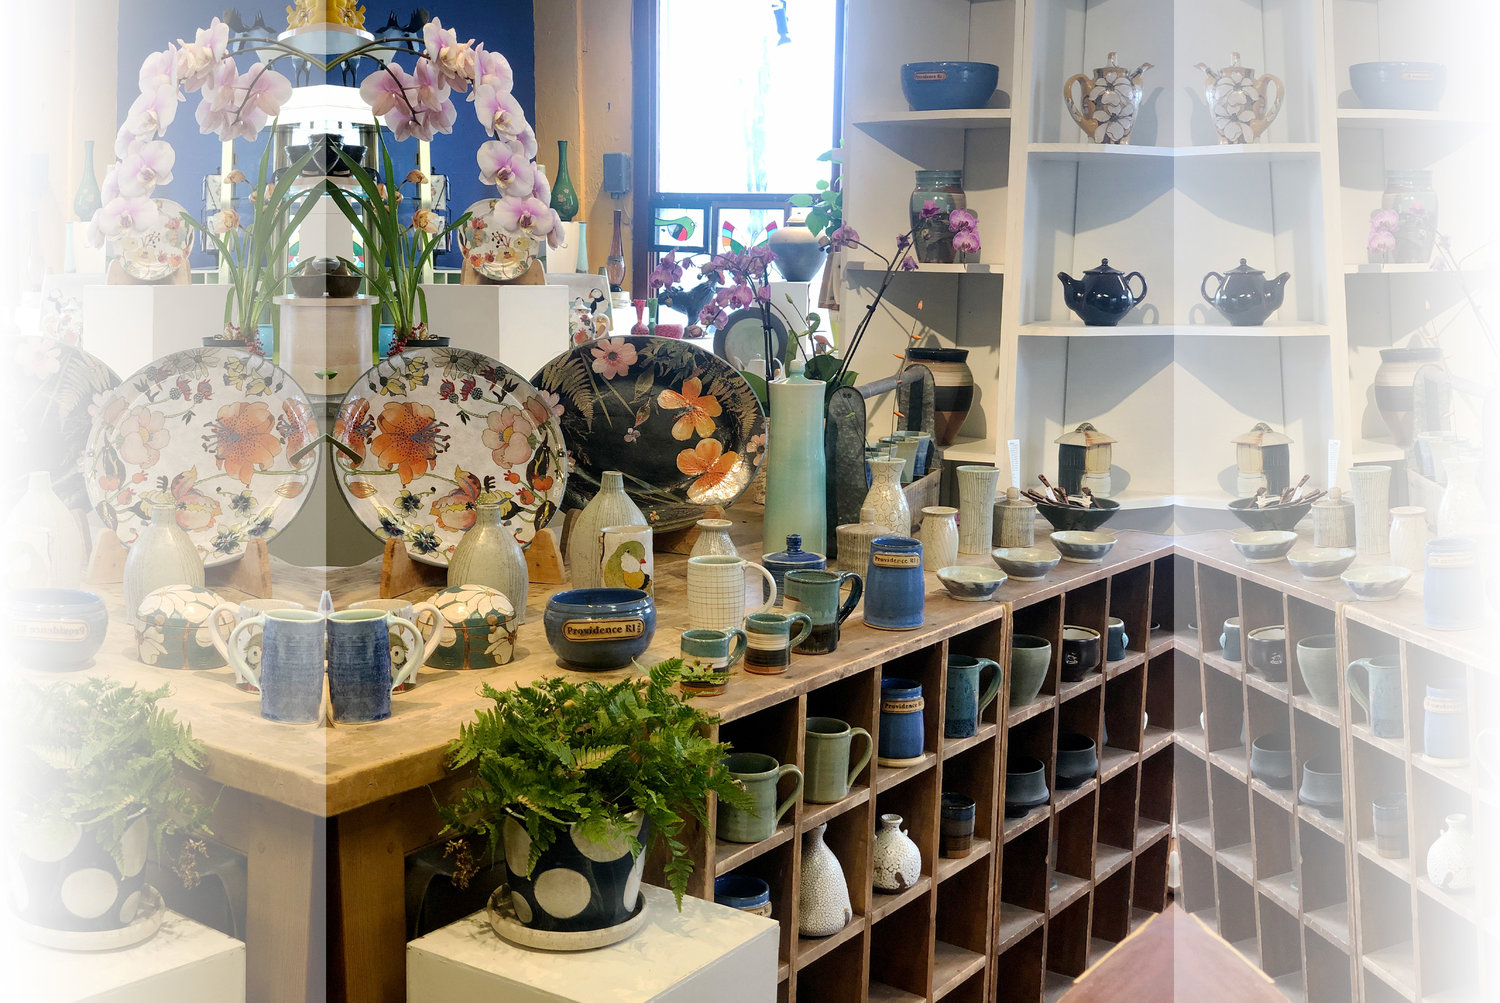 Find hand-crafted mugs at Three Wheel Studio on Wickenden